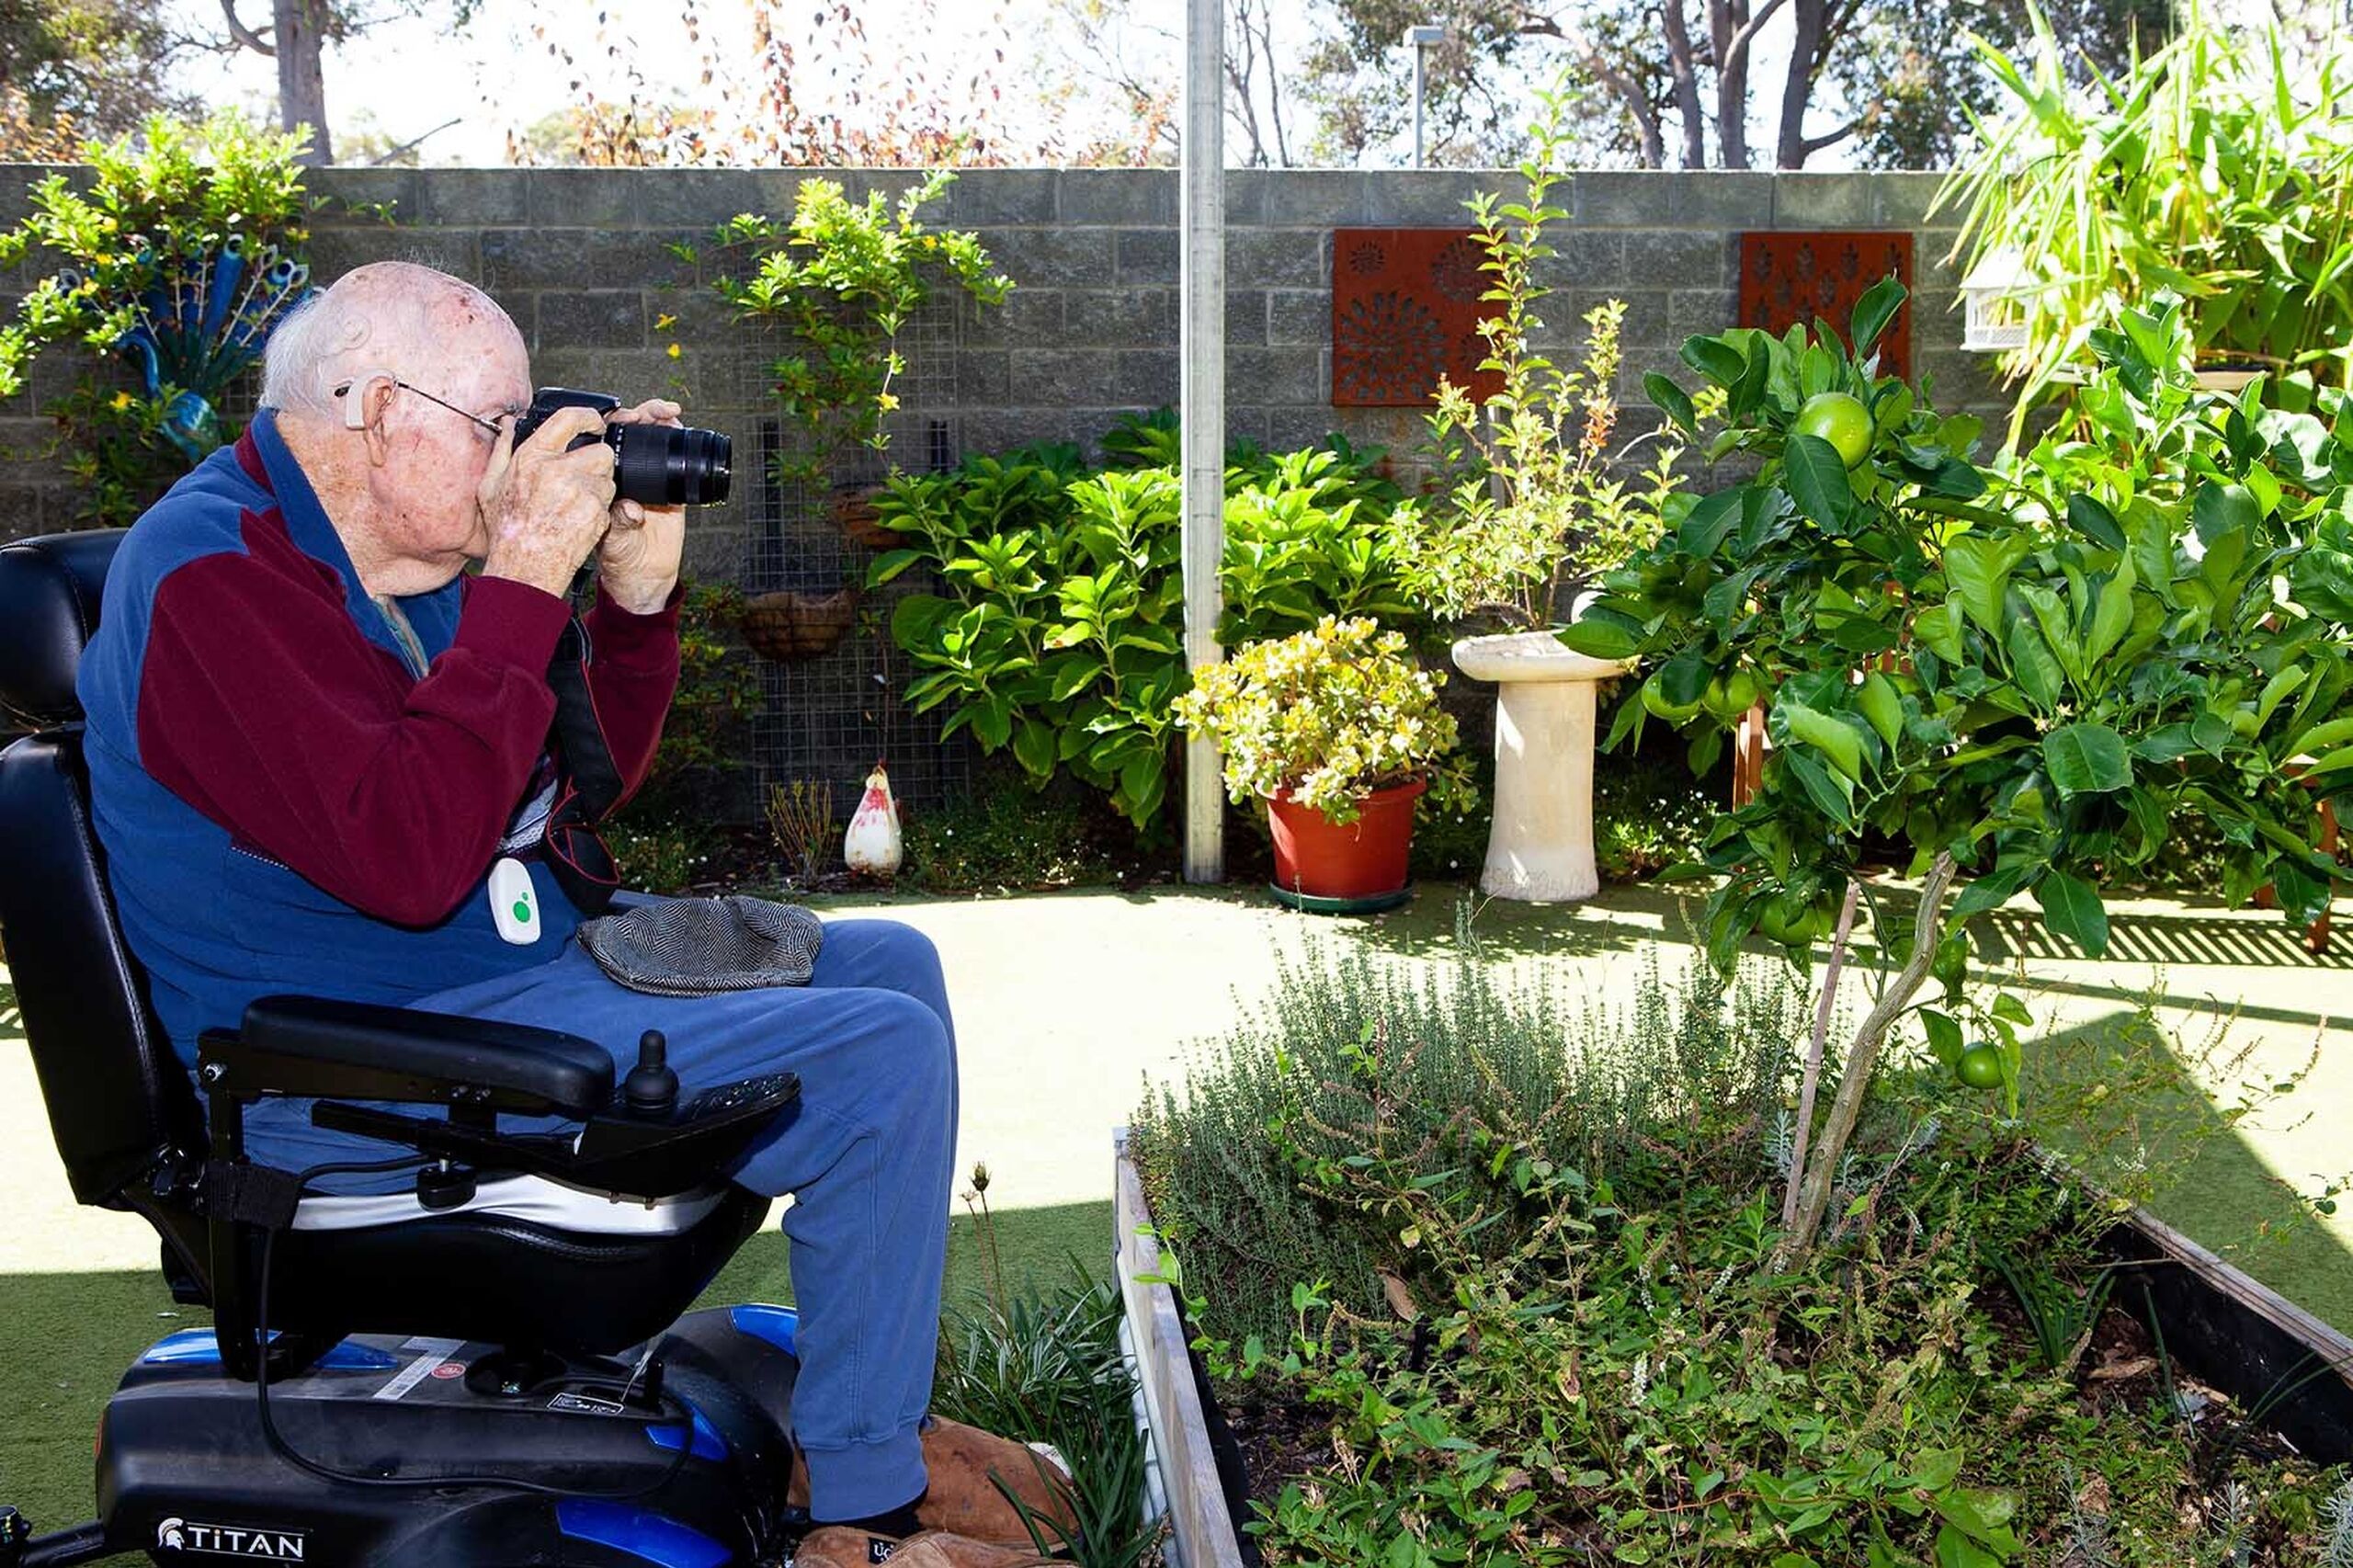 Rediscovering the joy of photography at Mirrambeena Residential Aged Care